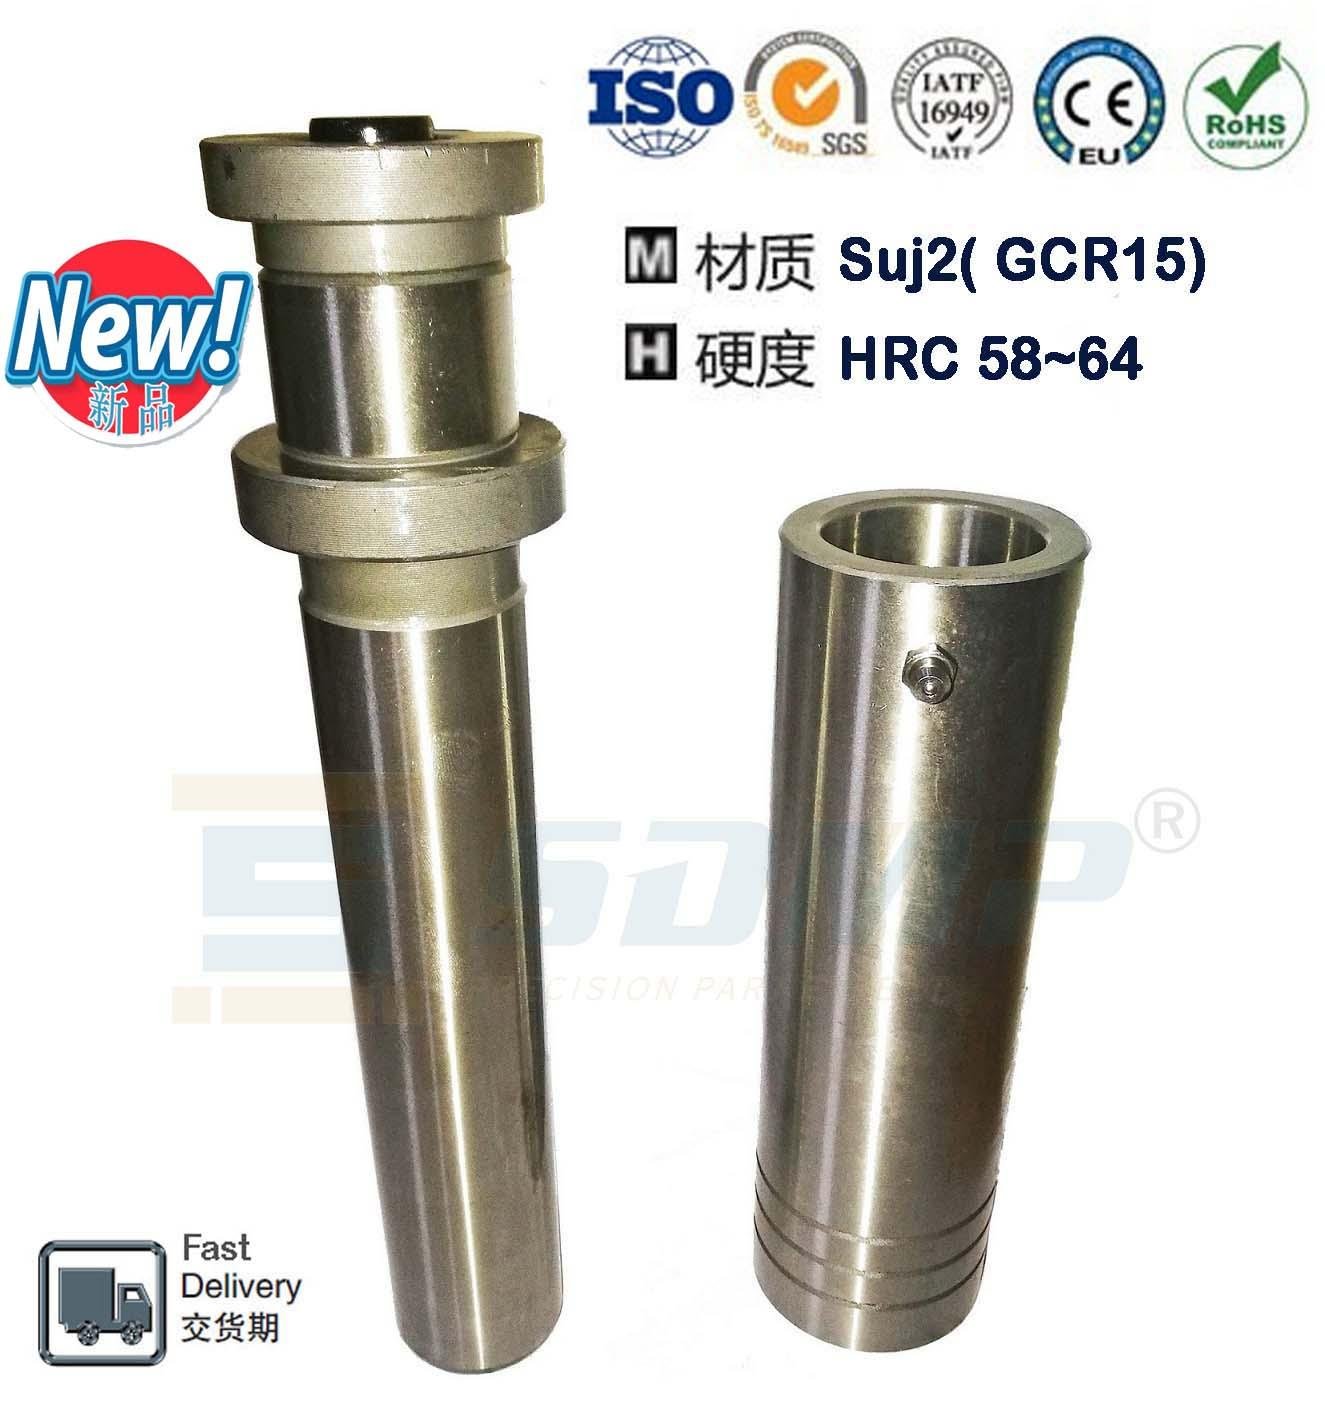 Guide Post and Bushing fit Die Set 1